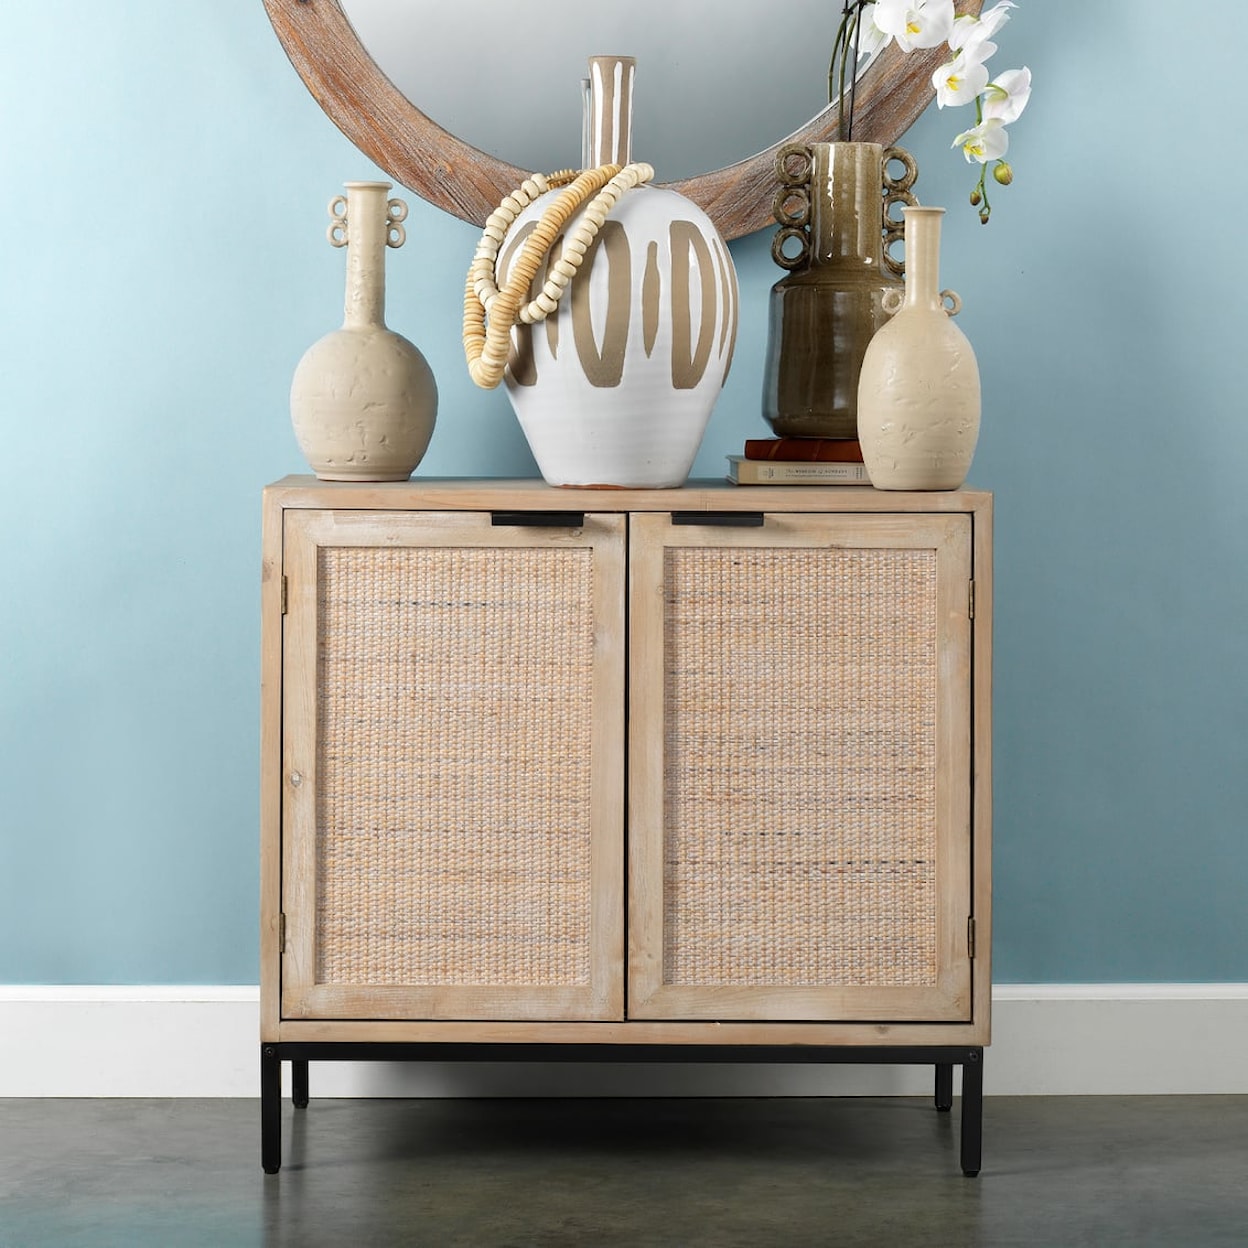 Jamie Young Co. Coastal Furniture REED 2 DOOR ACCENT CABINET